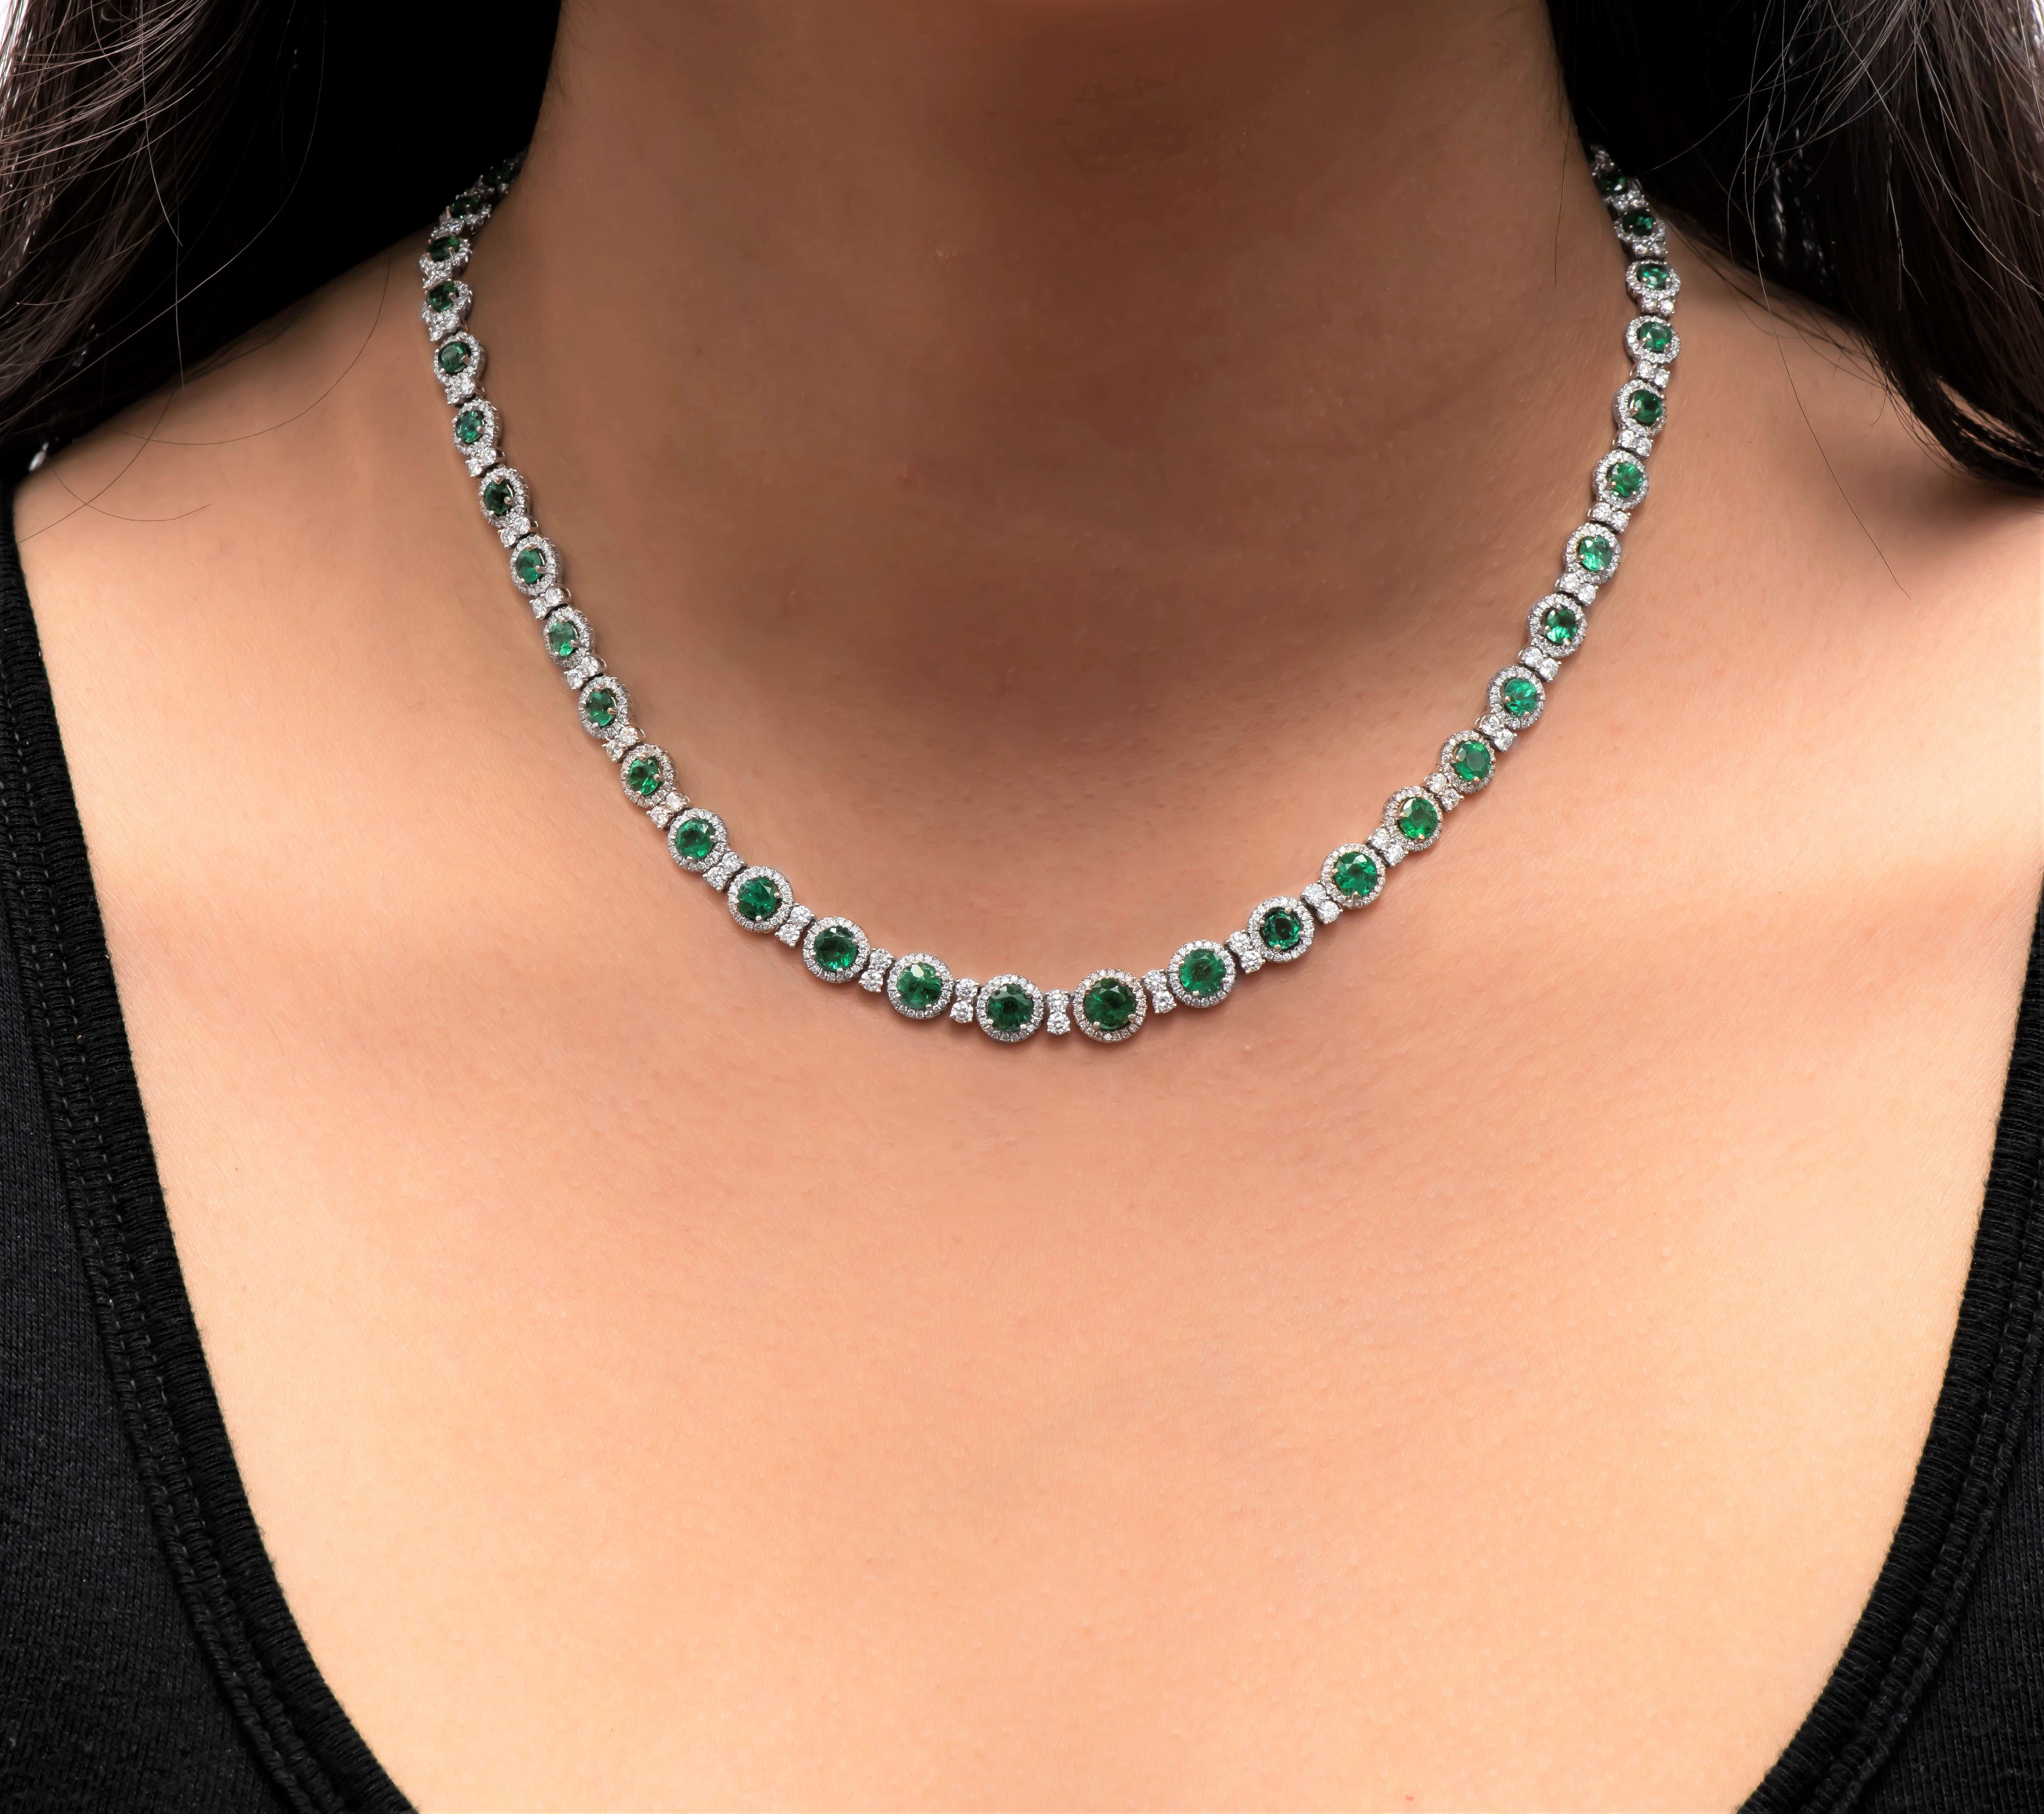 Round Cut 10.76 Carat Total Fine Emeralds in a 6.95 Carat Total Weight Diamond Necklace